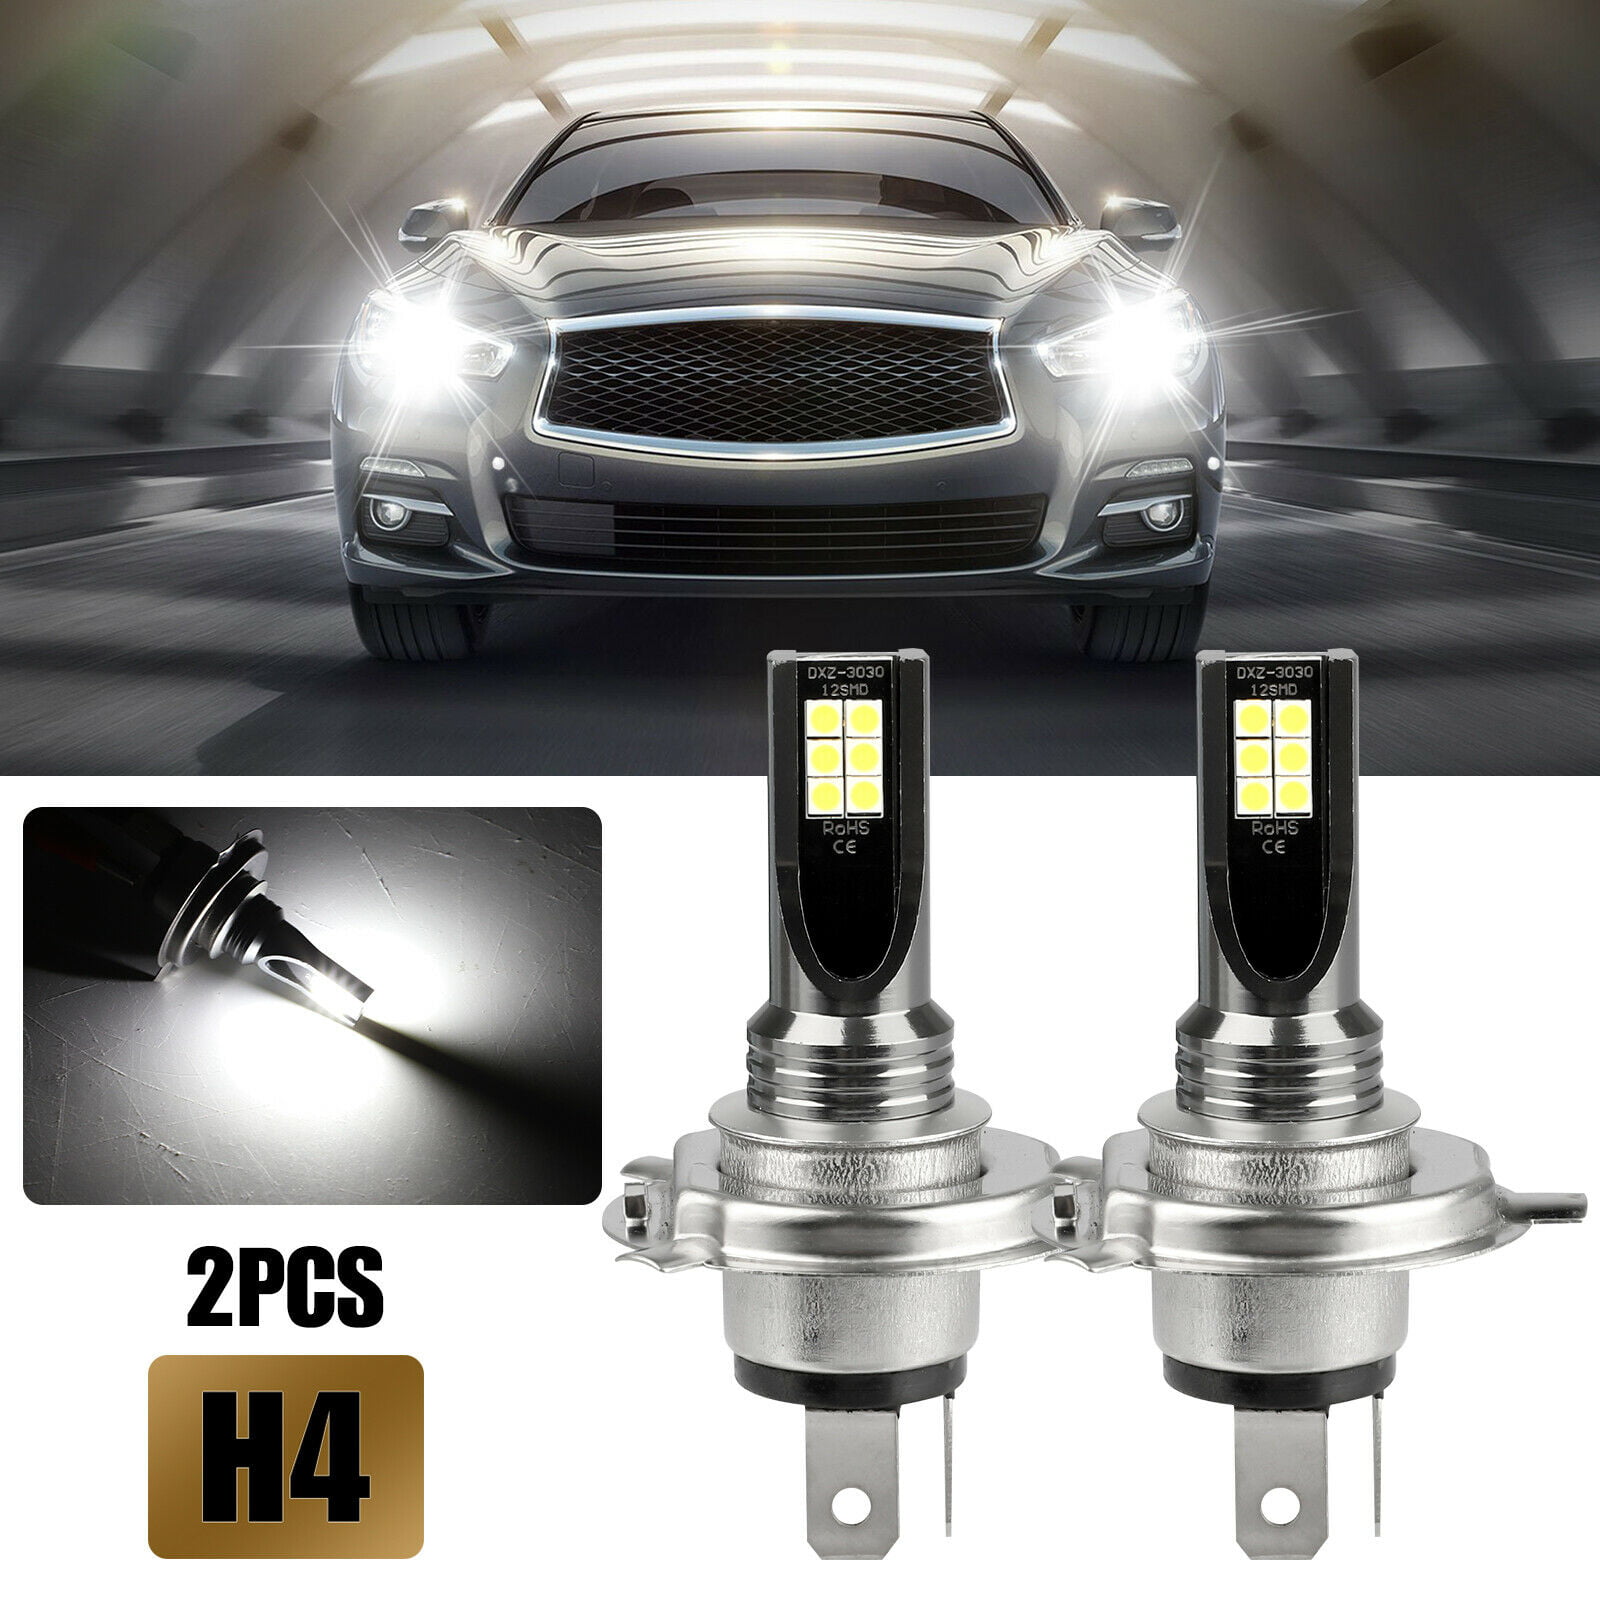 80W 8000 Lumens Hi/Lo Beam 6000K White, Pack of 2 LED Headlight Bulbs 9003 MICTUNING Extremely Bright H4 